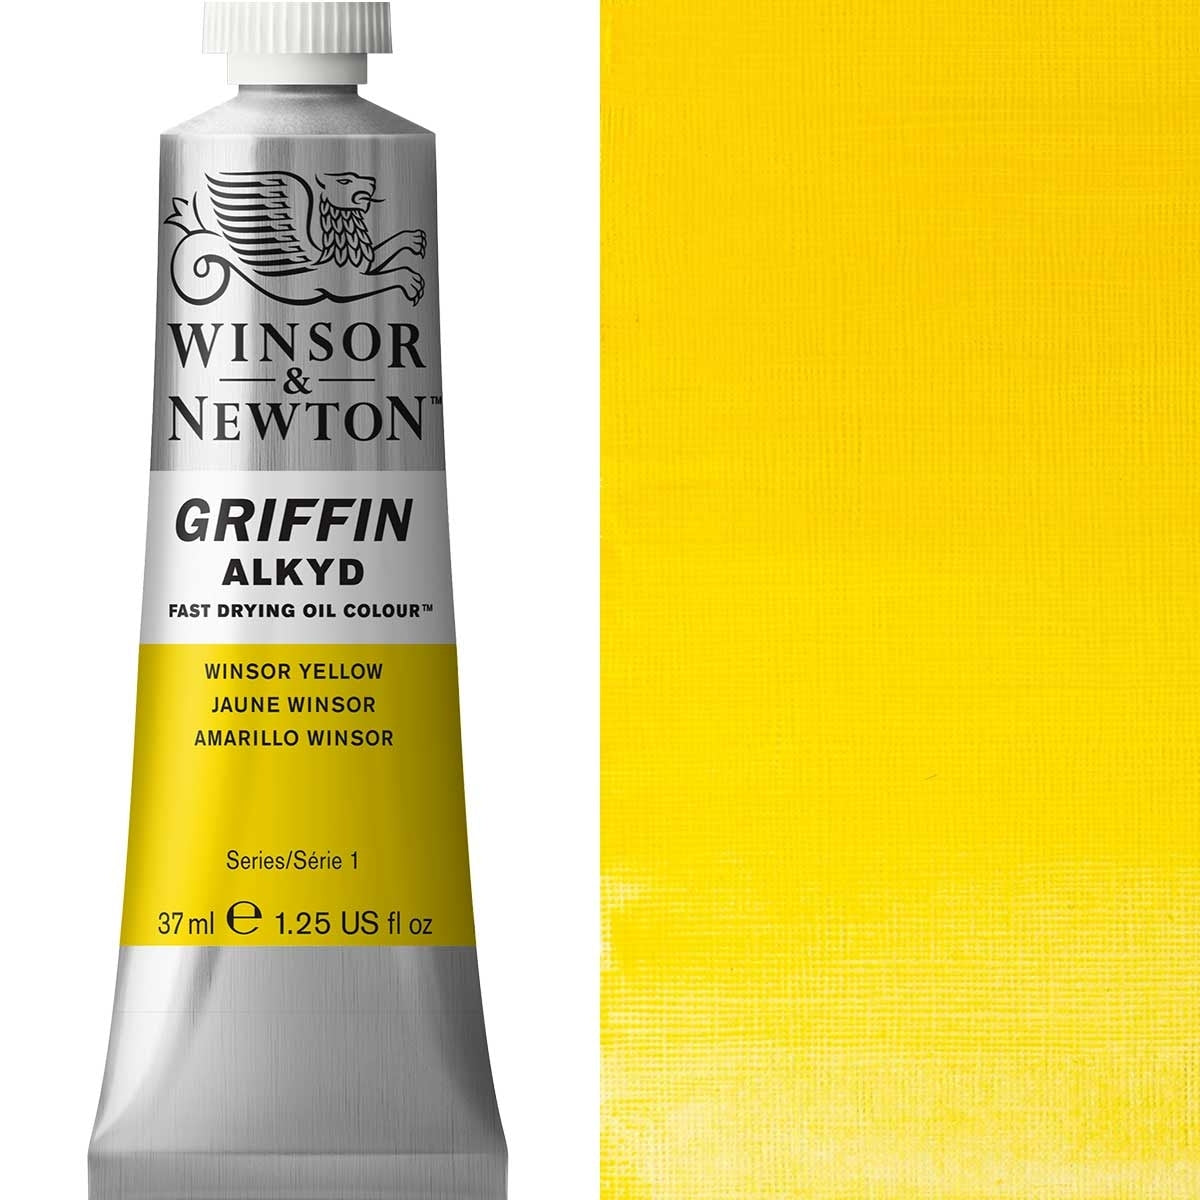 Winsor et Newton - Griffin Alkyd Oil Color - 37ml - Winsor Yellow